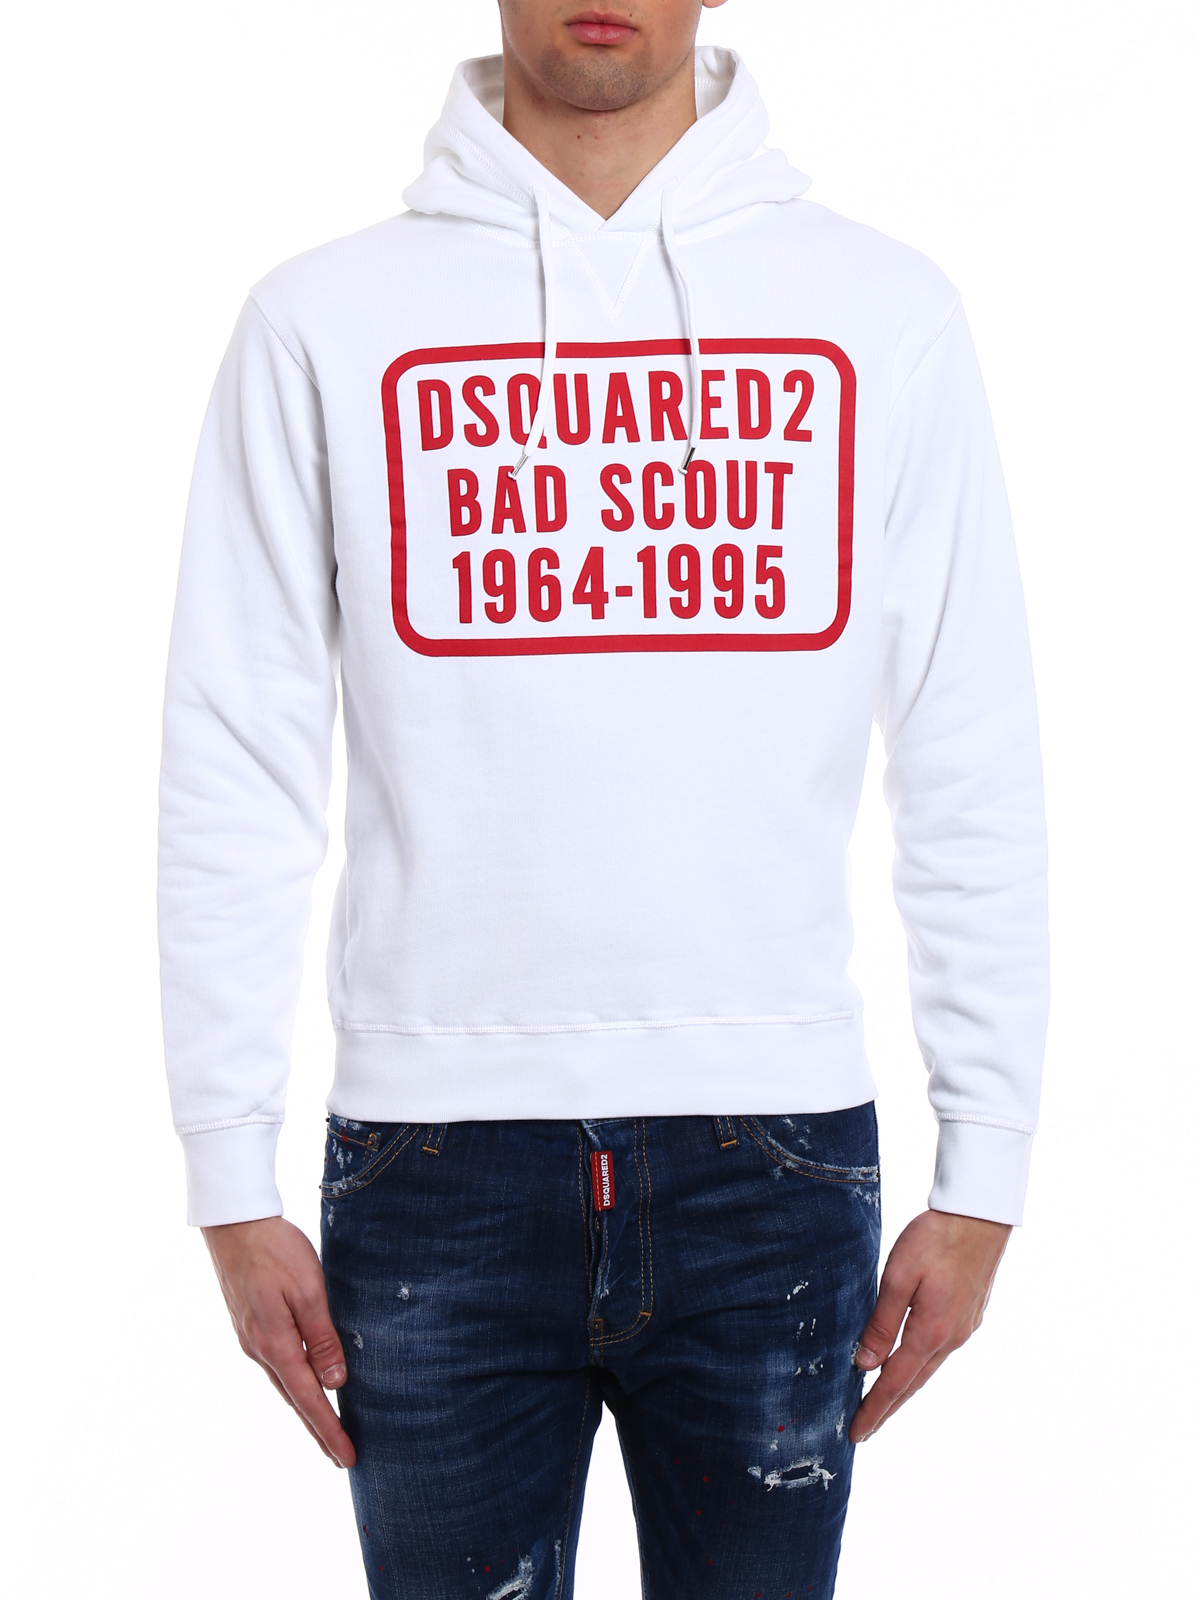 Dsquared2 - Bad Scout hoodie - سویشرت 